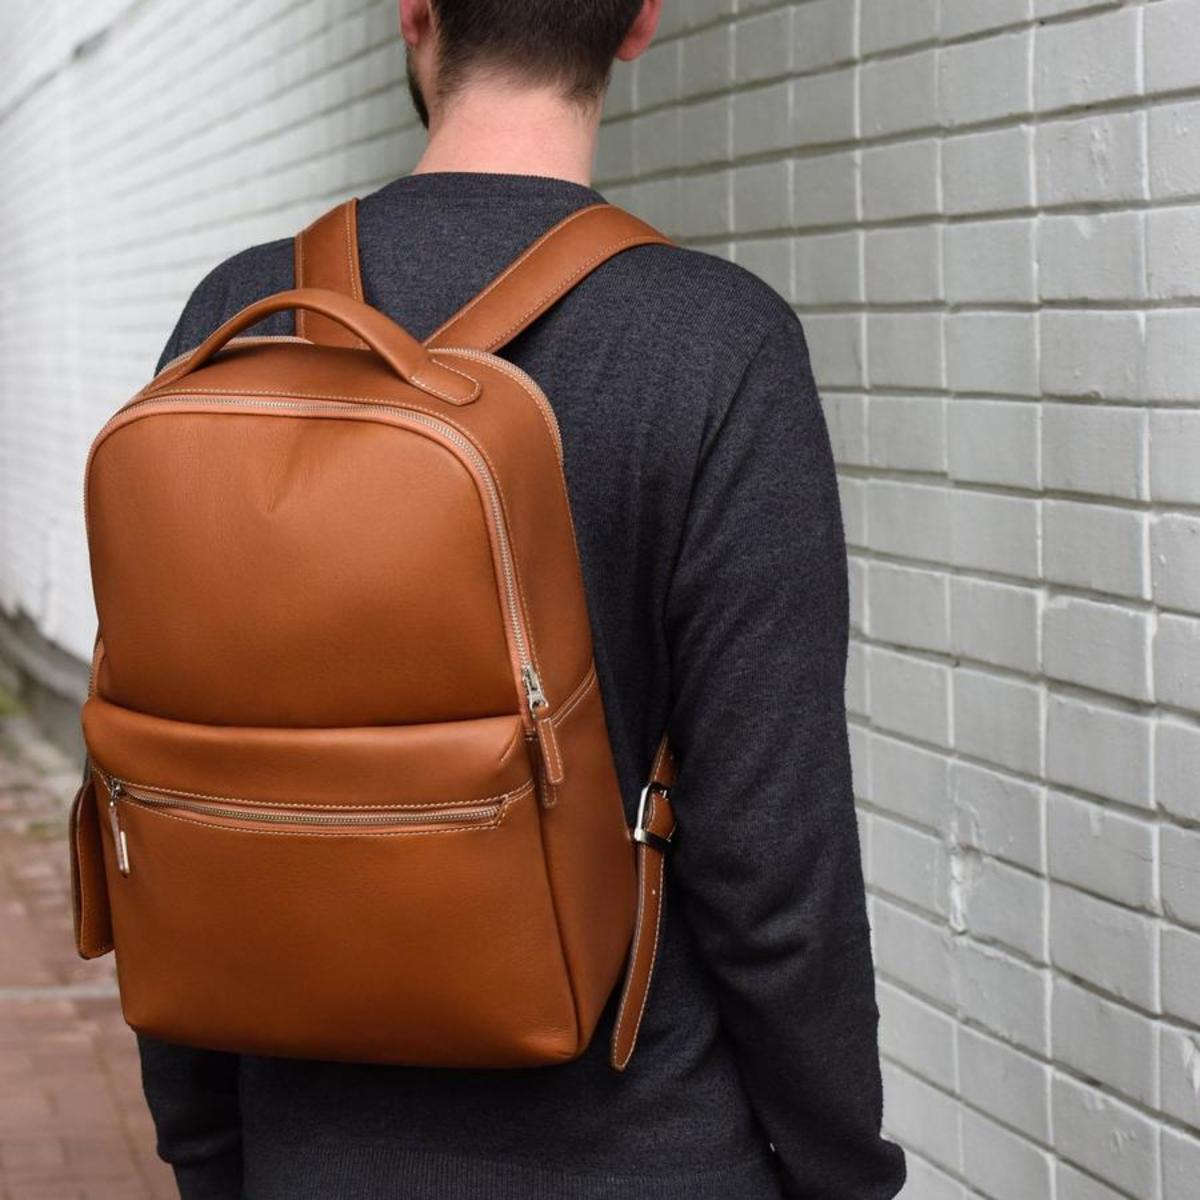 Backpack_Tan-Product-2_900x